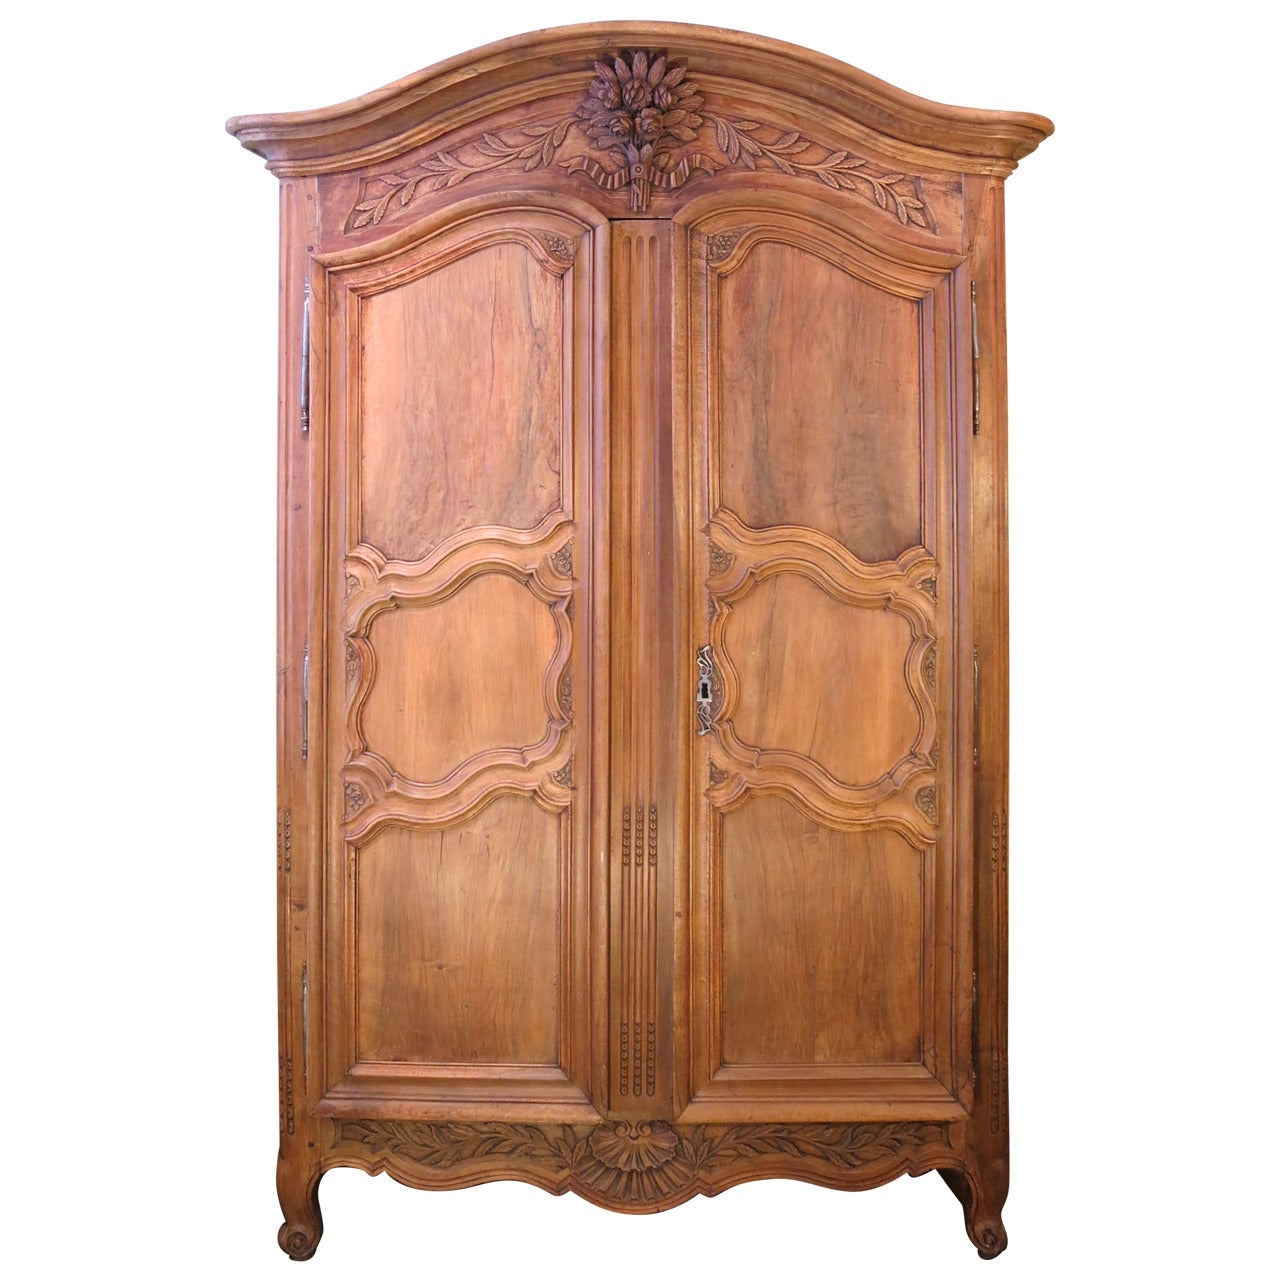 18th Century Period Regence, Louis XV Grand Walnut Armoire For Sale